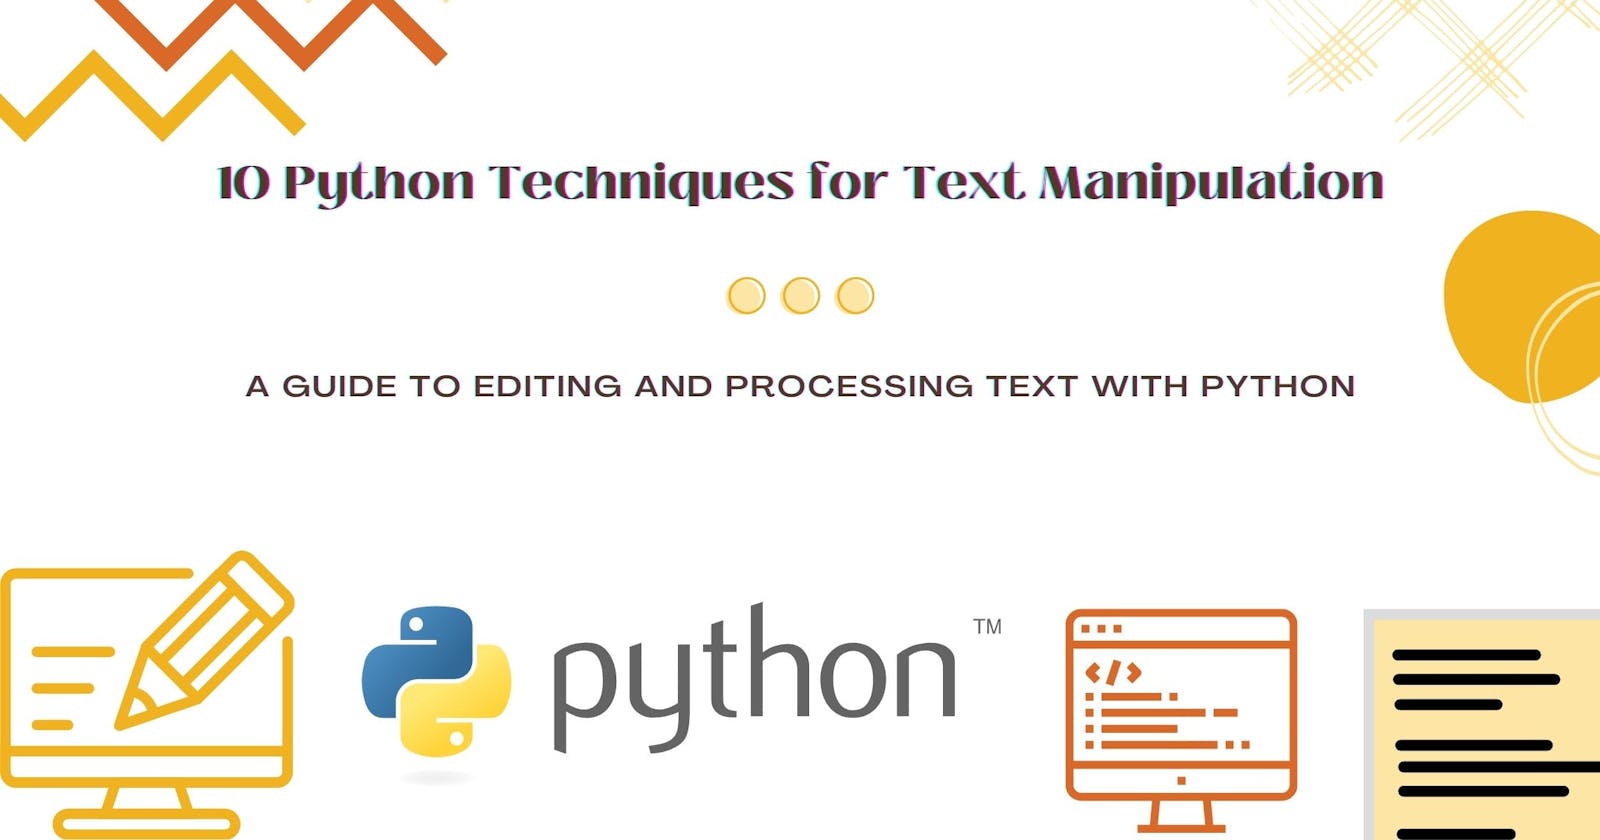 10 Python Techniques for Text Manipulation